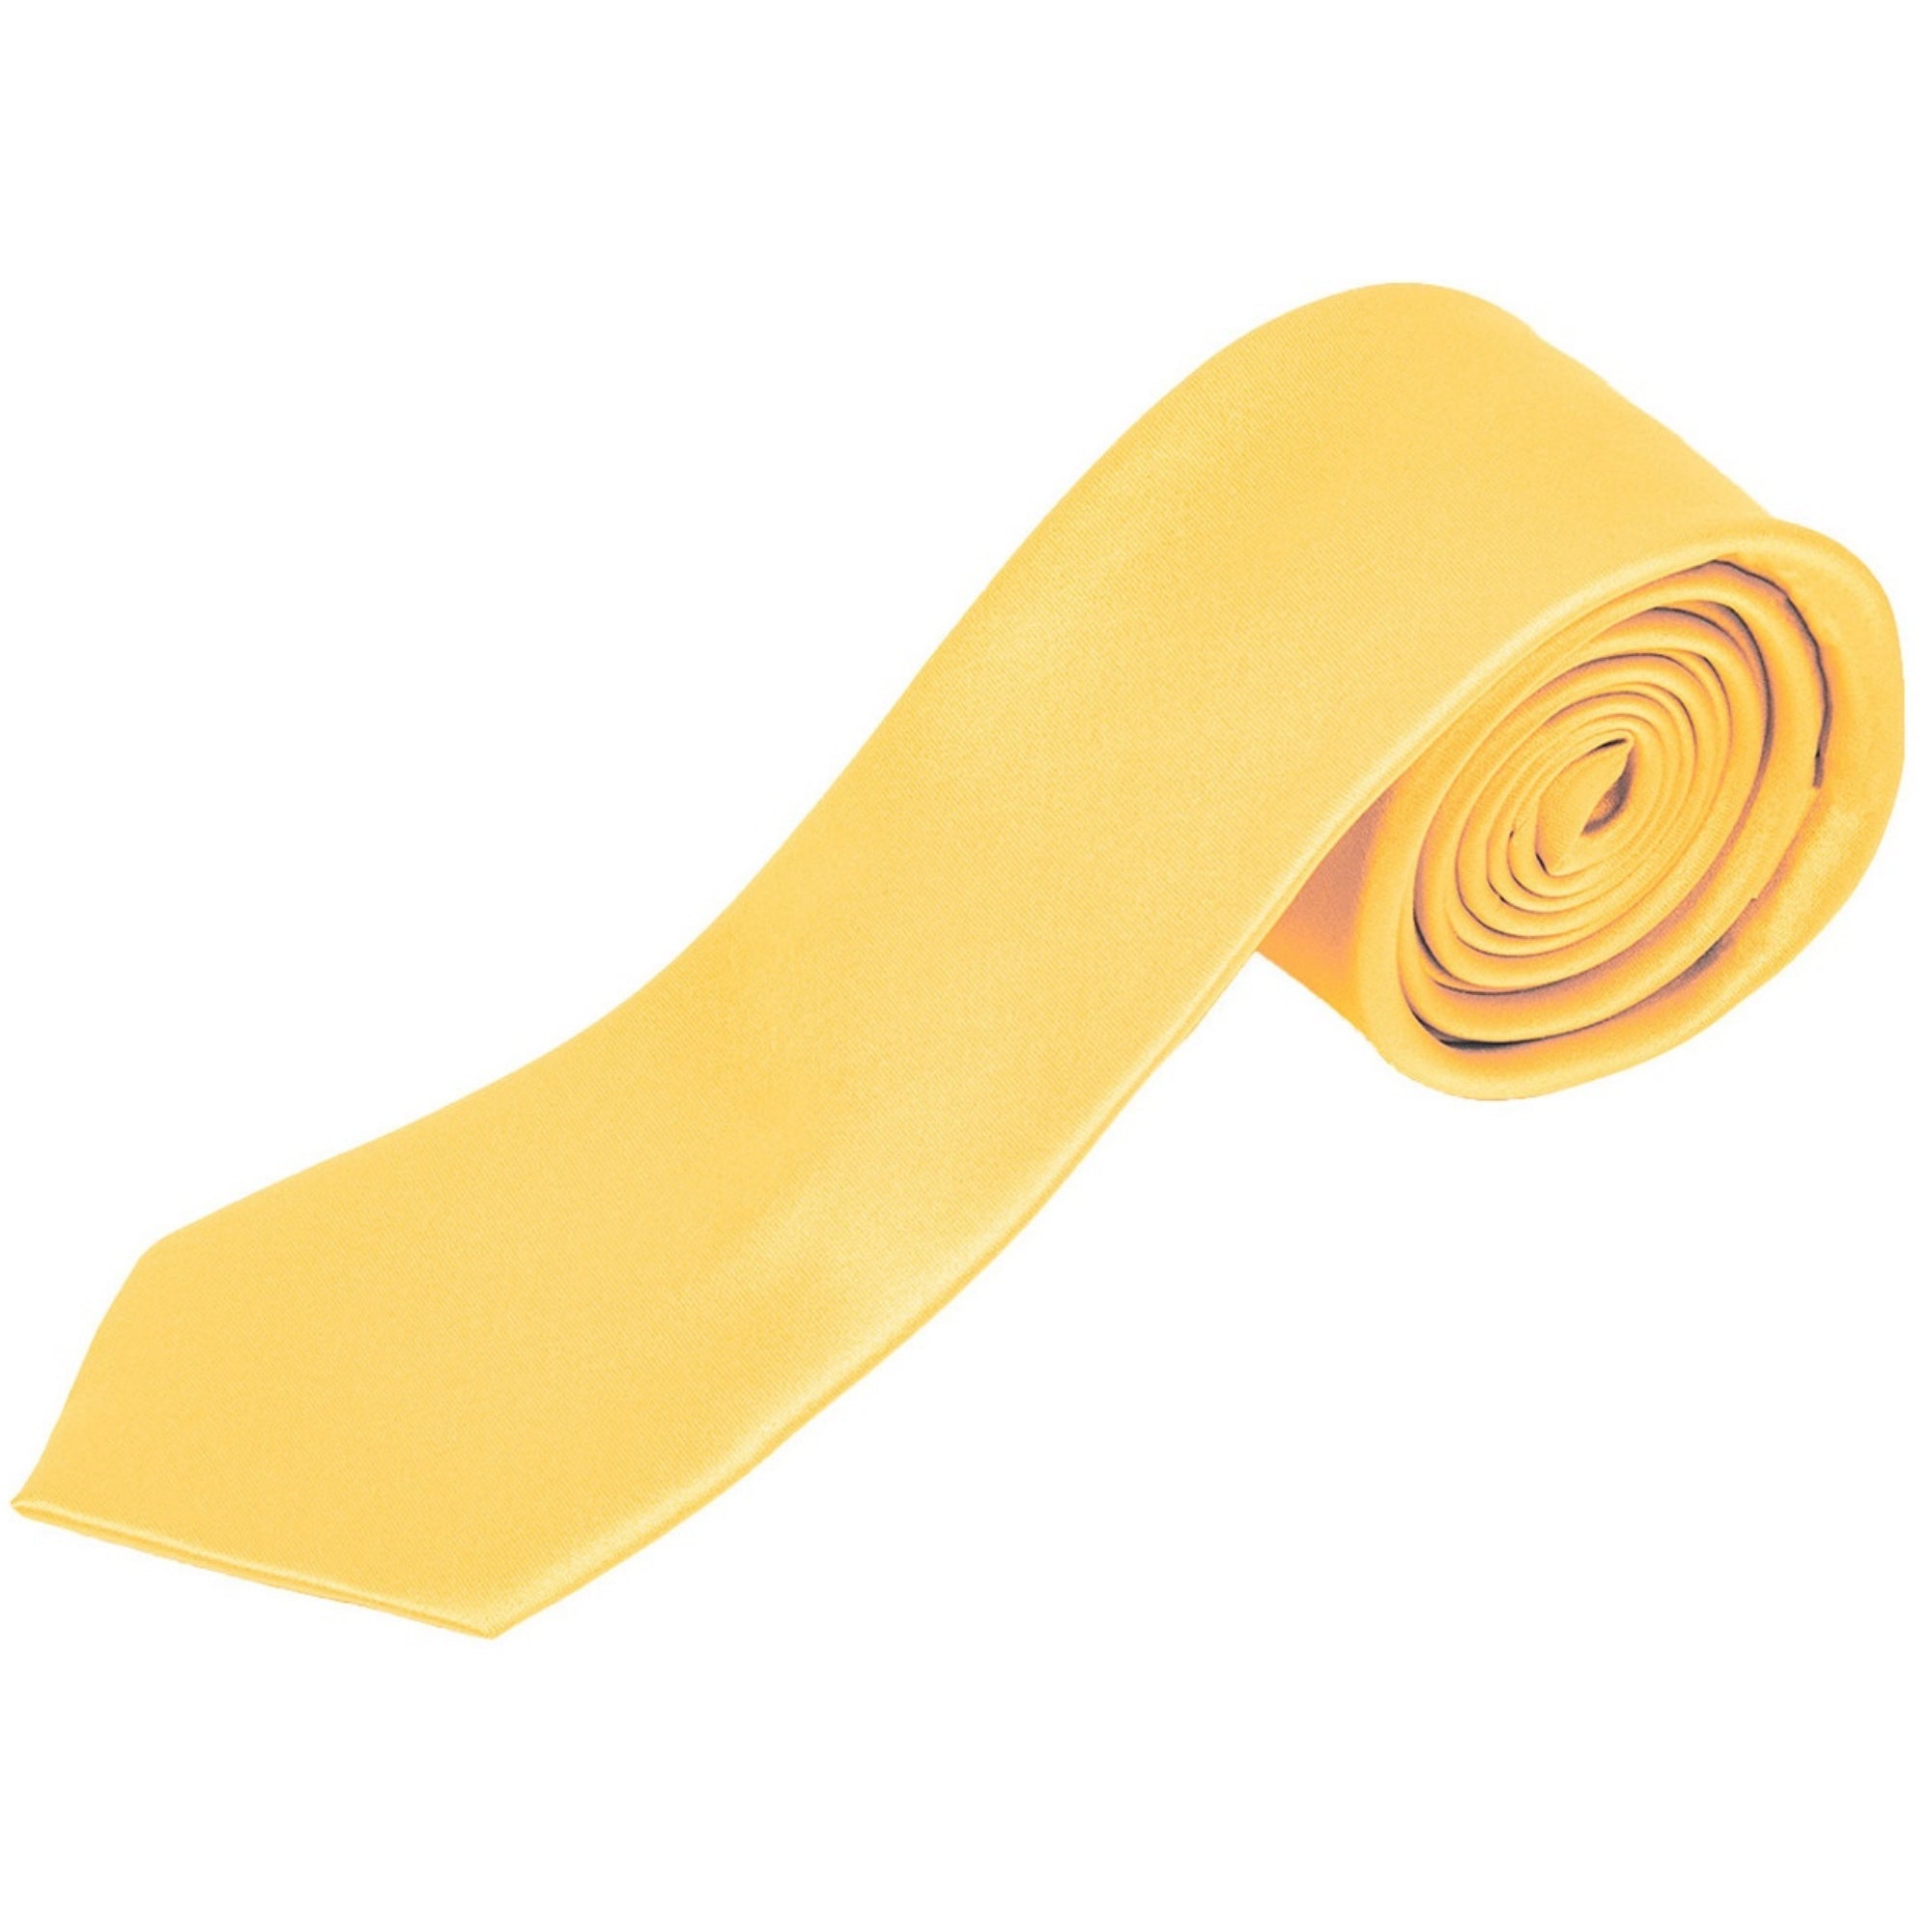 Men's Solid Color 2 Inch Wide And 57 Inch Long Slim Neckties Neck Tie TheDapperTie Yellow 57" long and 2" wide 